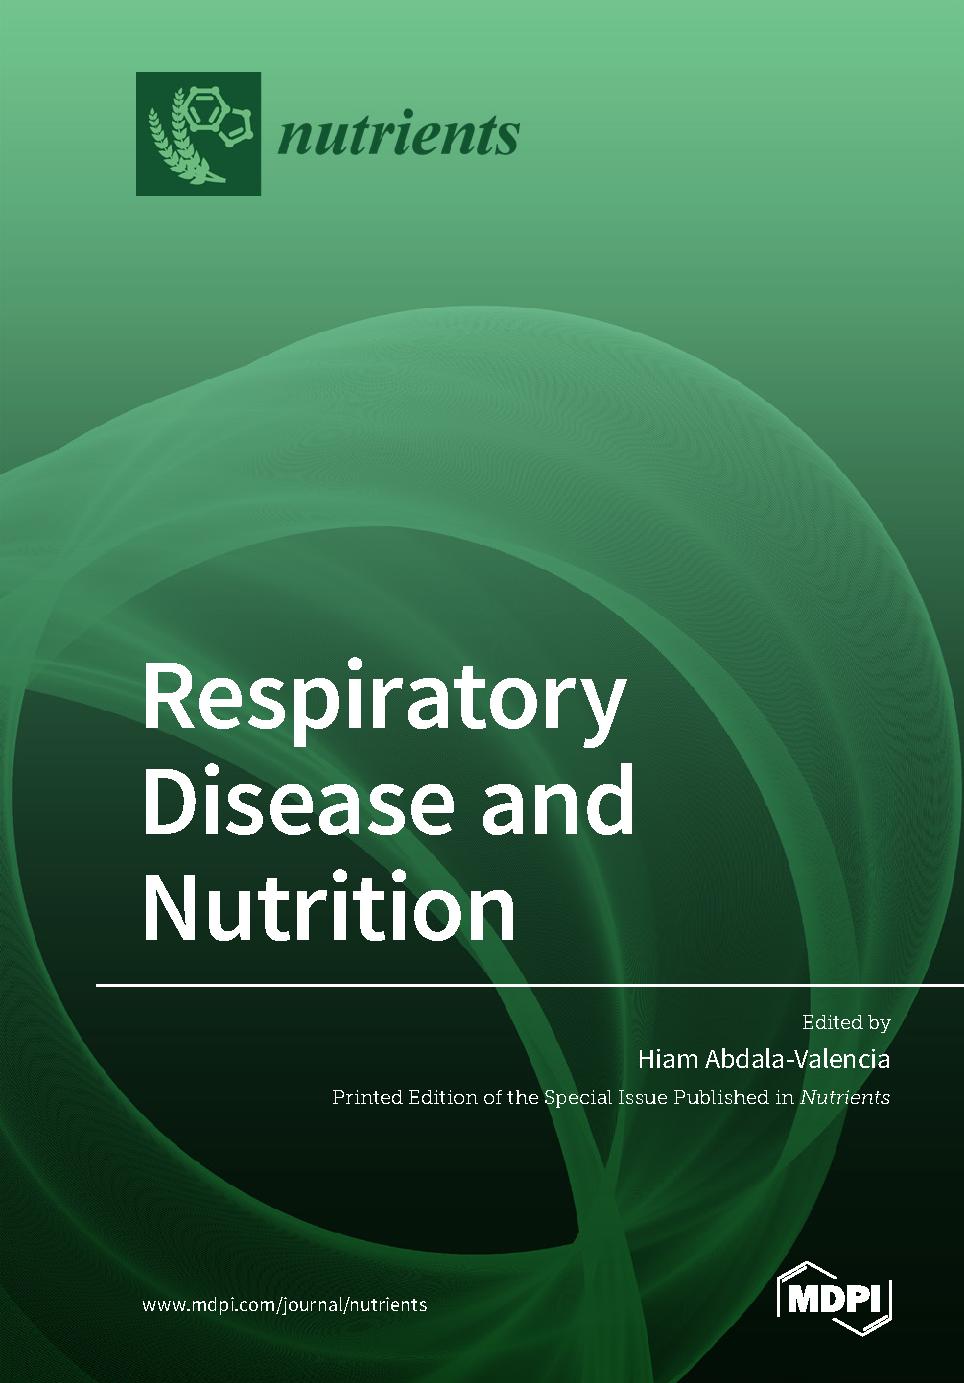 Respiratory Disease and Nutrition PDF Host